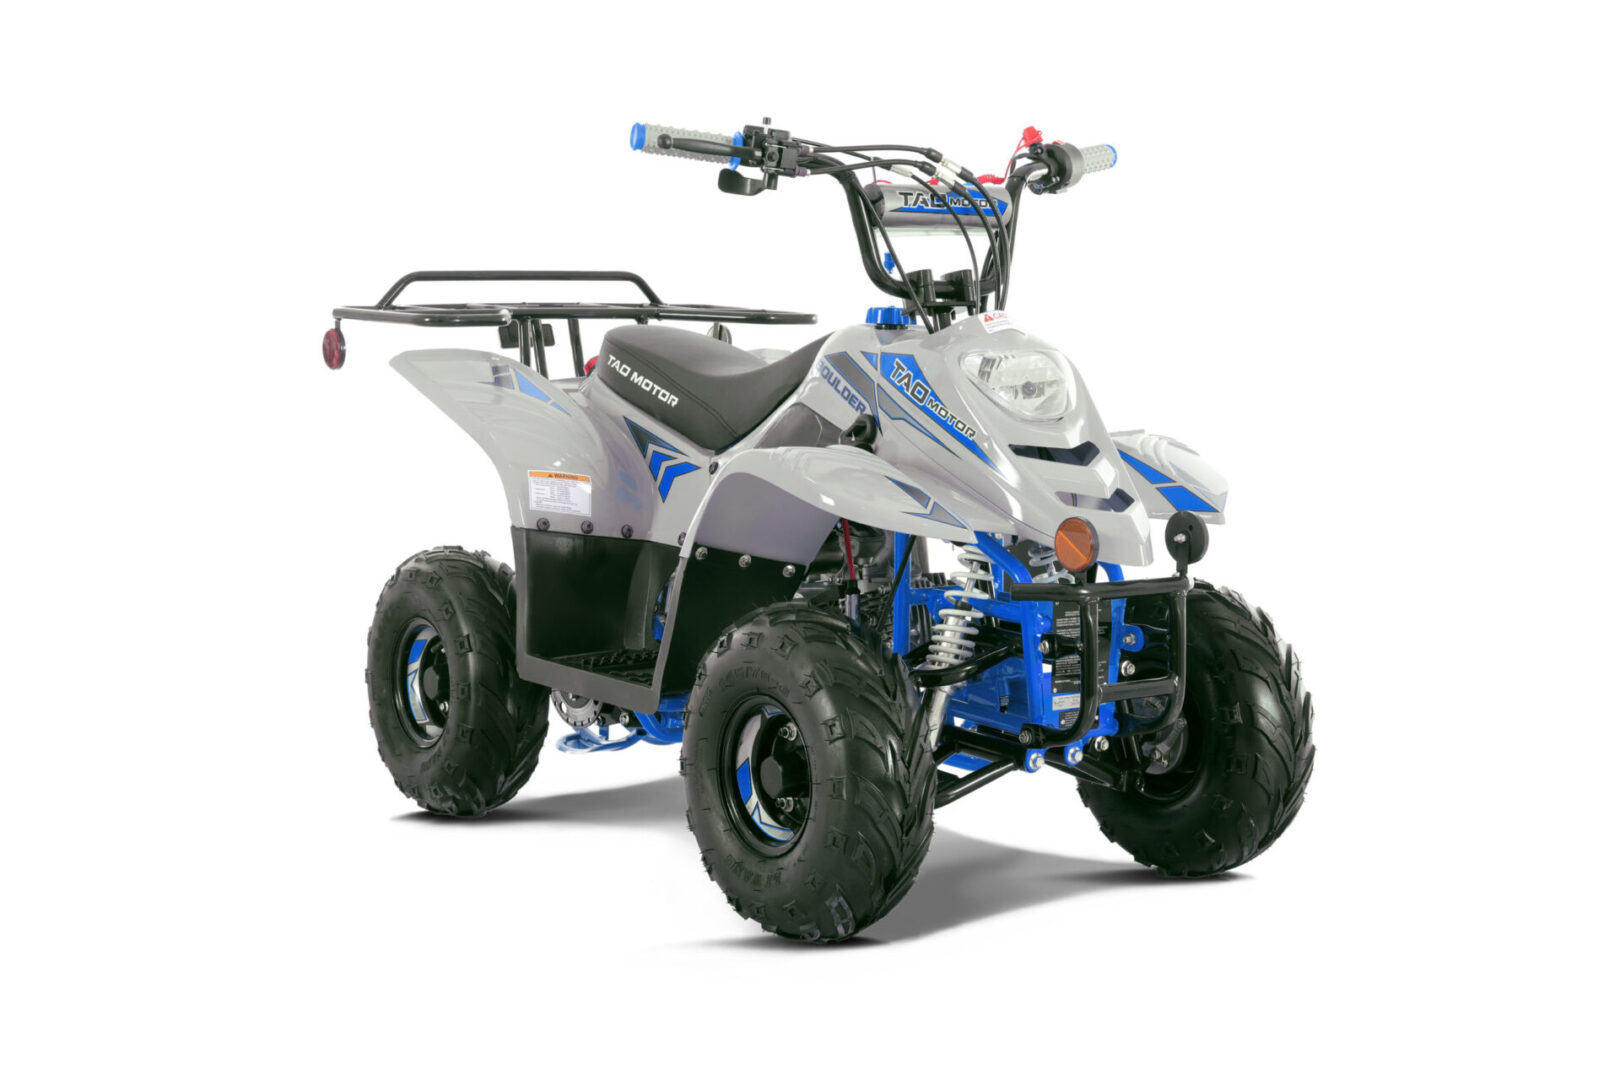 A white and blue atv is parked on the ground